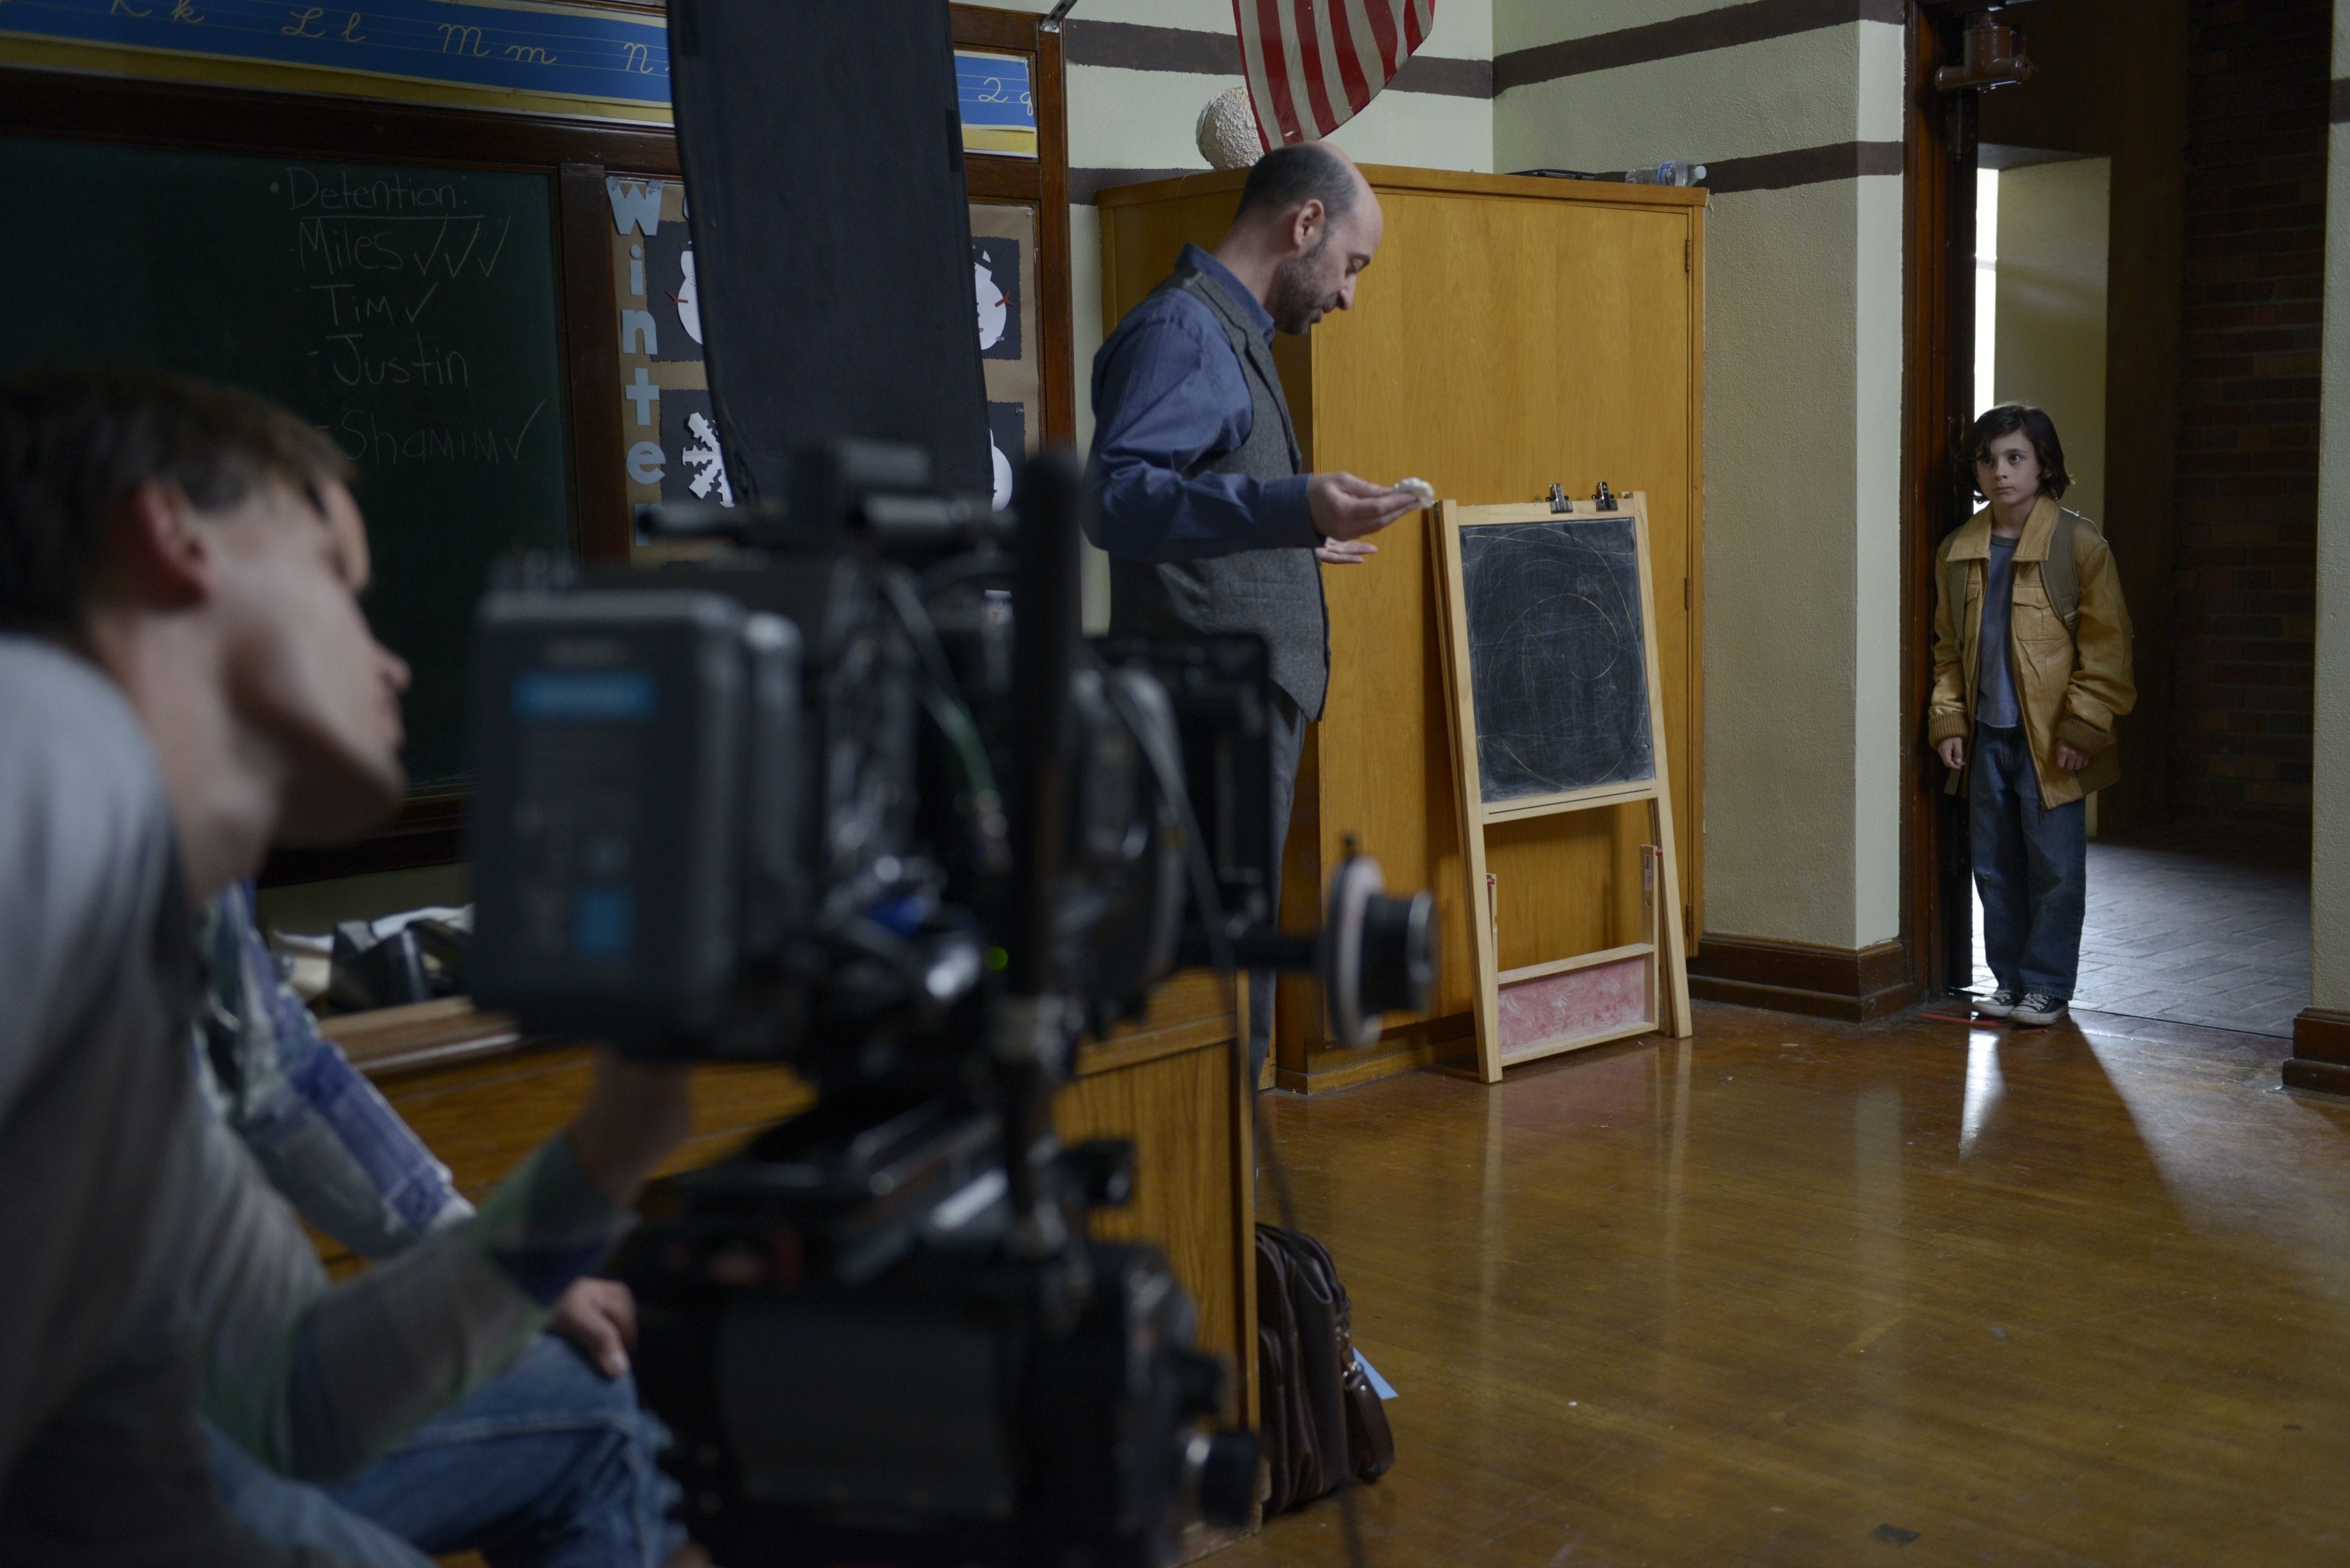 Actor Jeff Blumberg as The Teacher shooting the short film Dirty Laundry